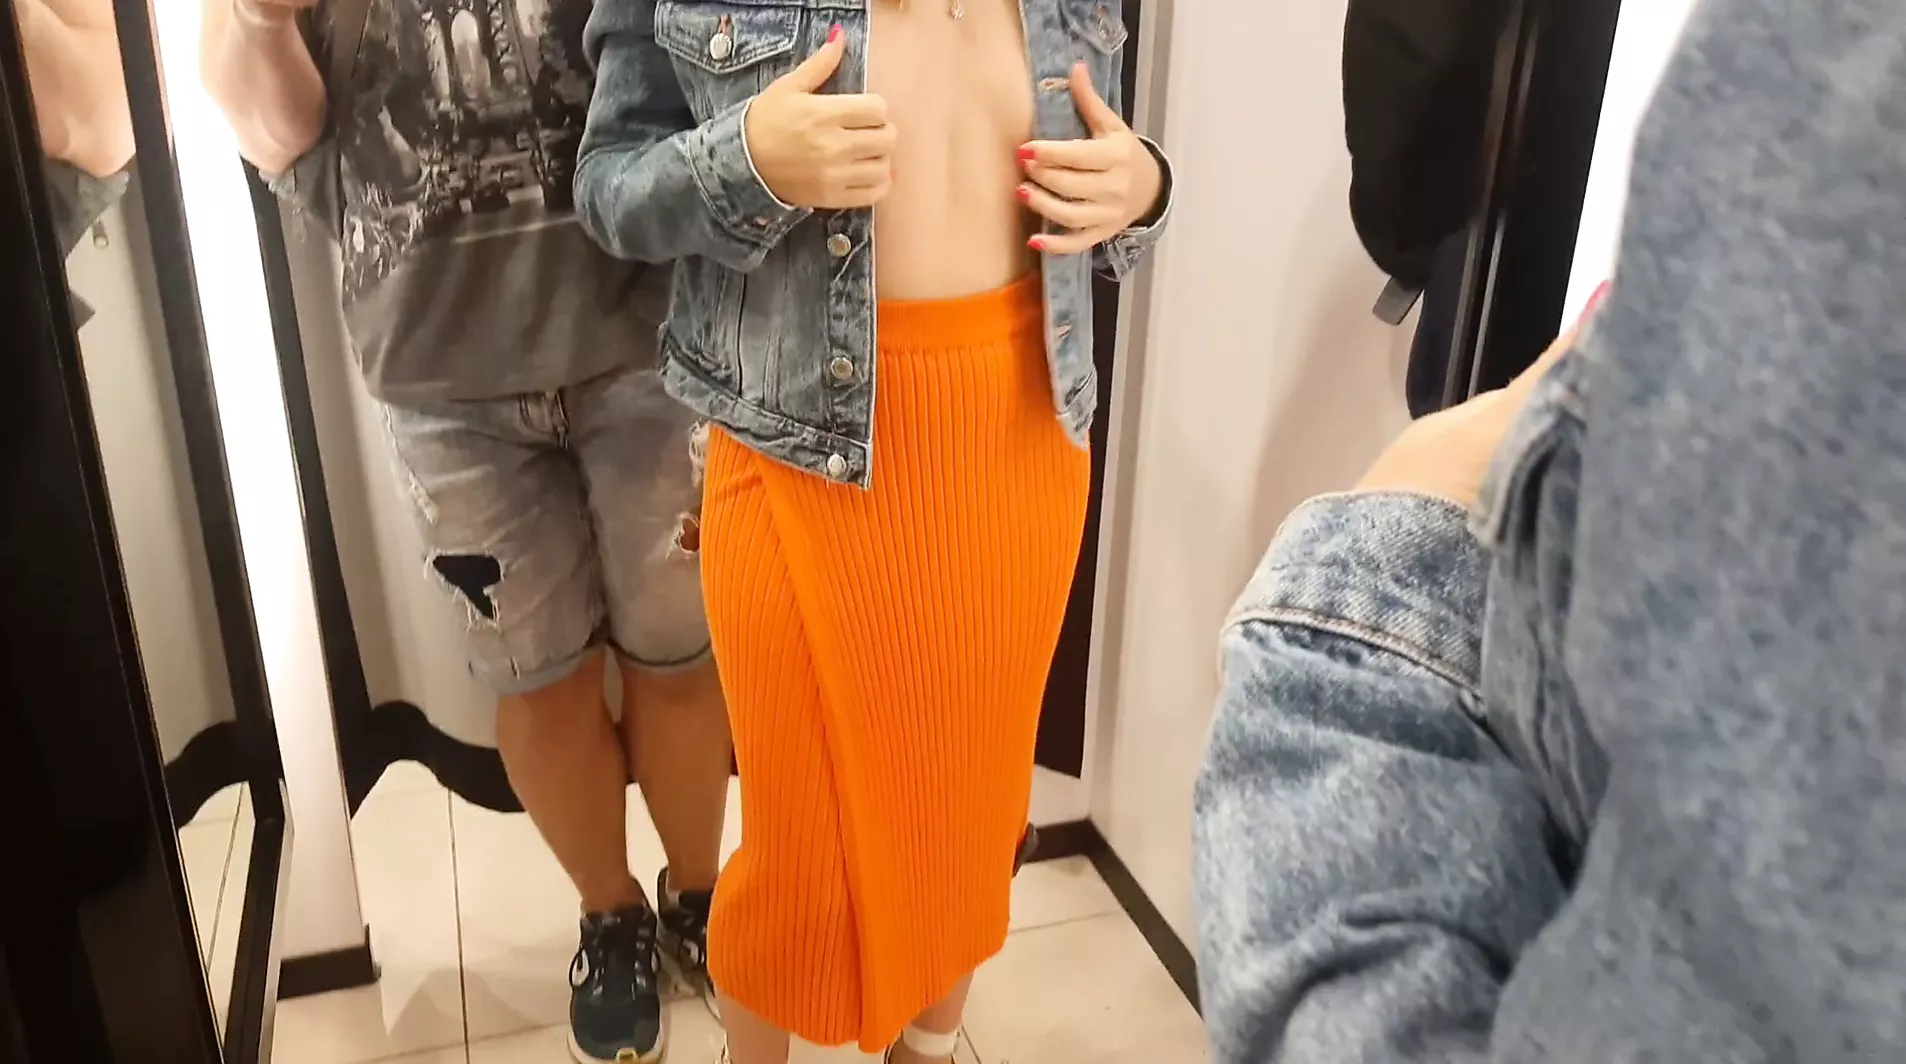 A Sexy Stranger Asked Me to look at her in the fitting Room pic photo